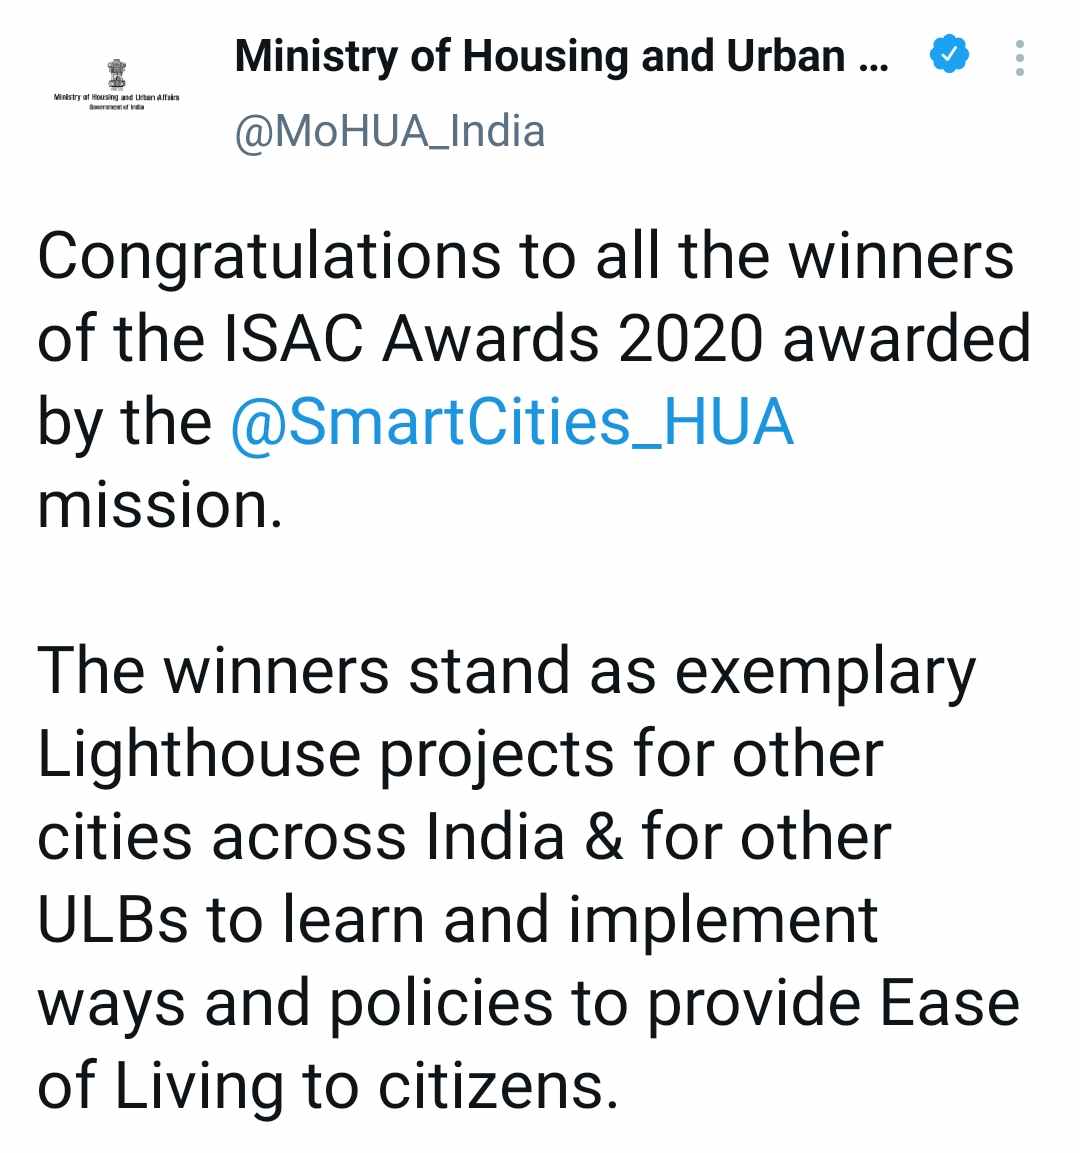 Union Ministry of Housing and Urban Affairs tweeted